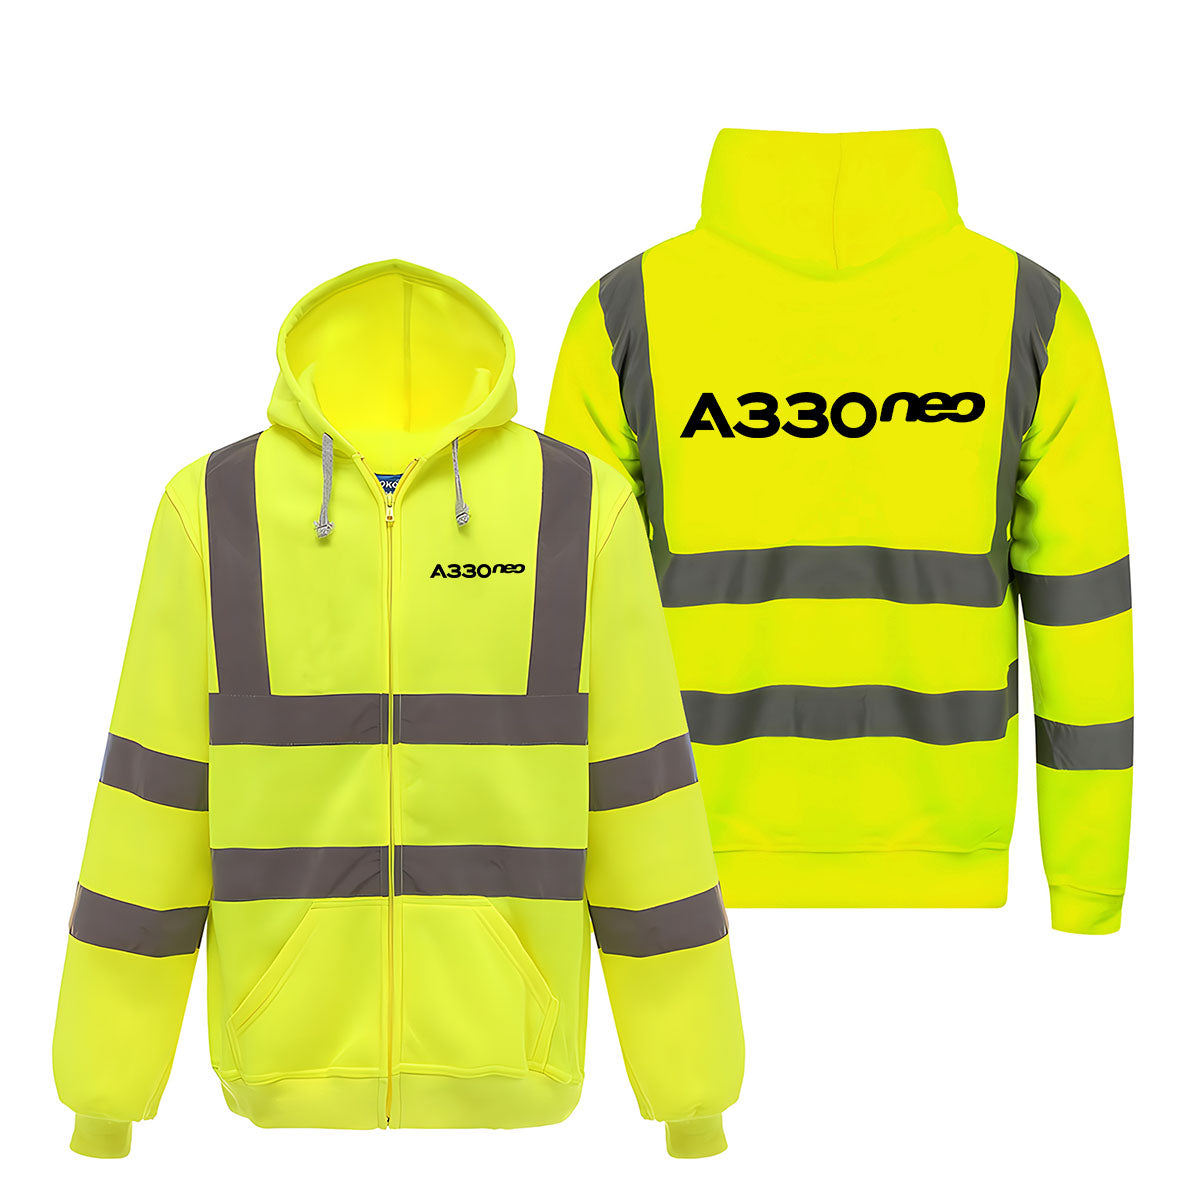 A330neo & Text Designed Reflective Zipped Hoodies